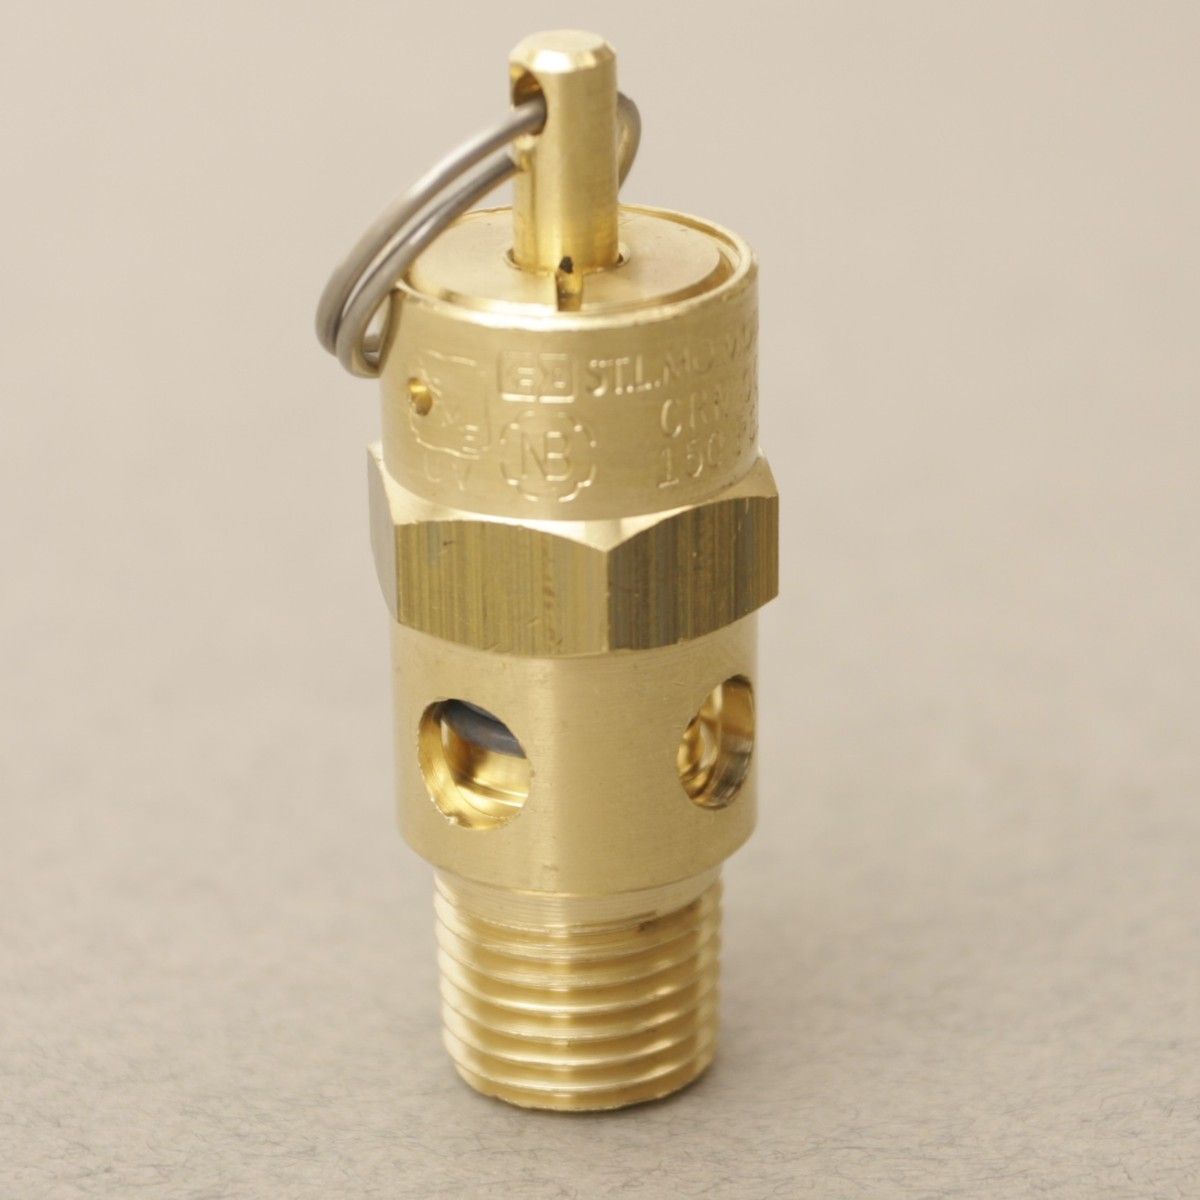 Control Devices 1/4" Brass Variable Pressure Relief Valve 0-100 psi Adjustable 